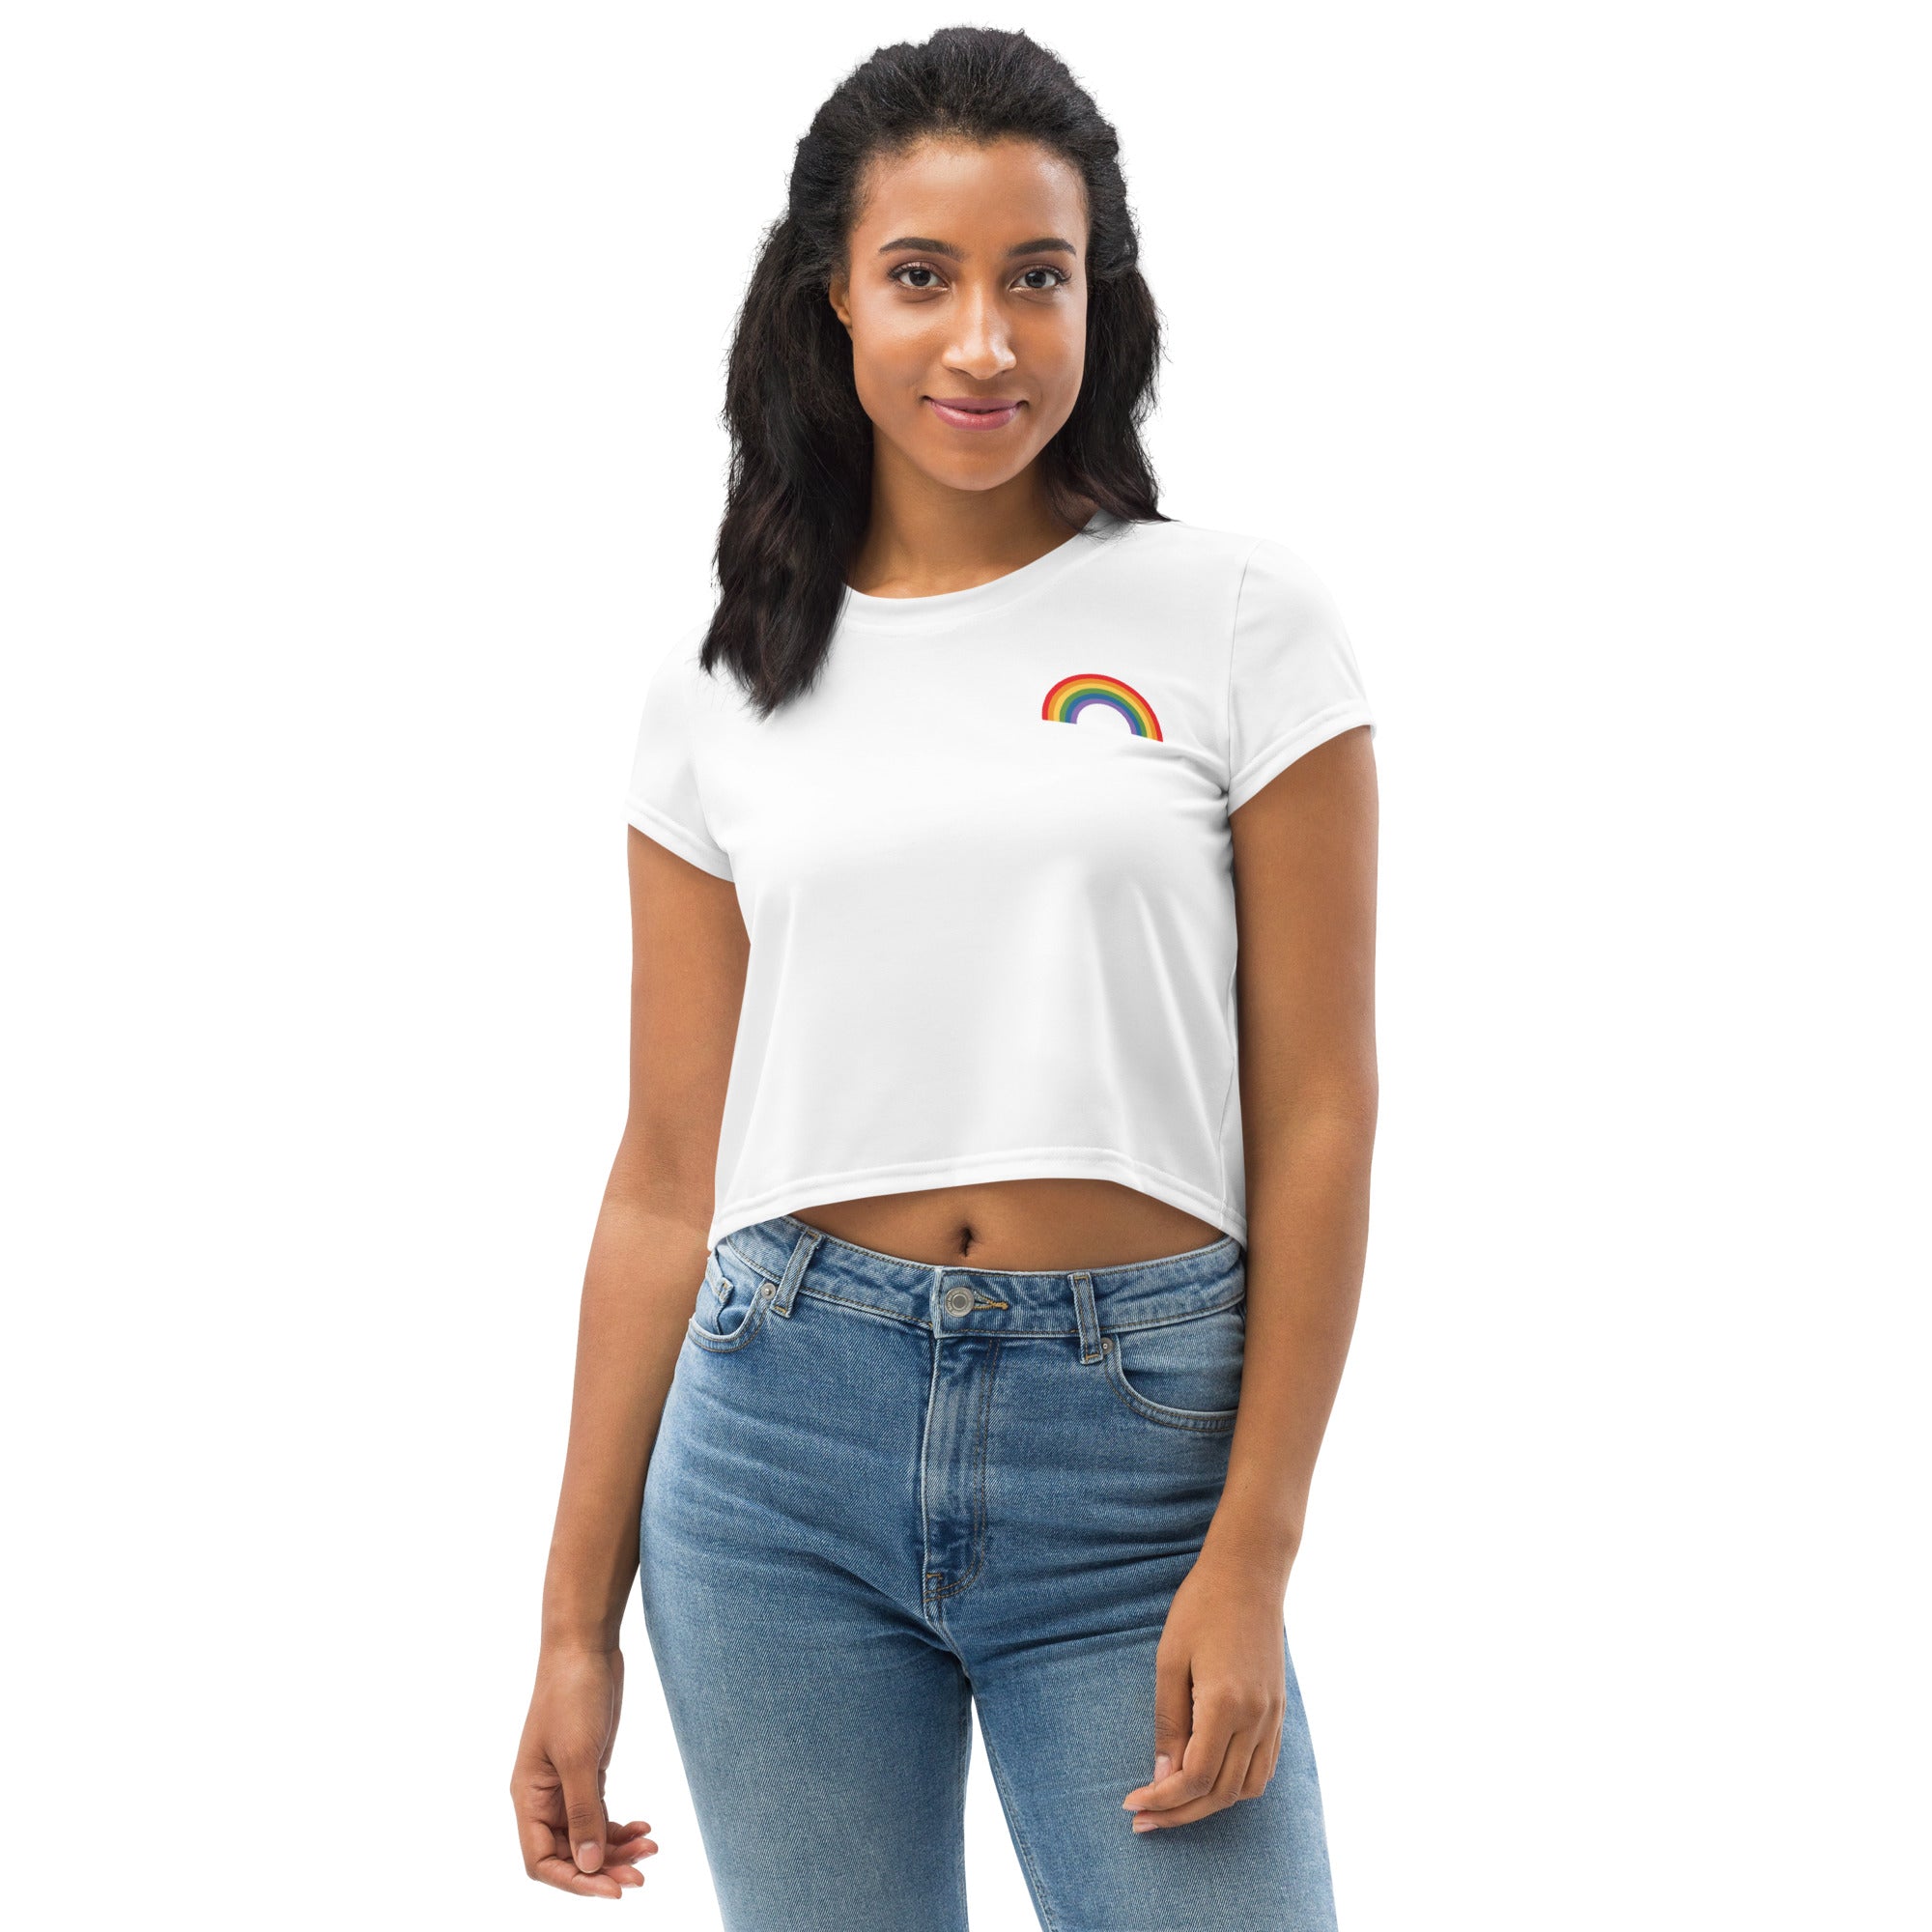 TCTC X The Trevor Project Cropped Tee